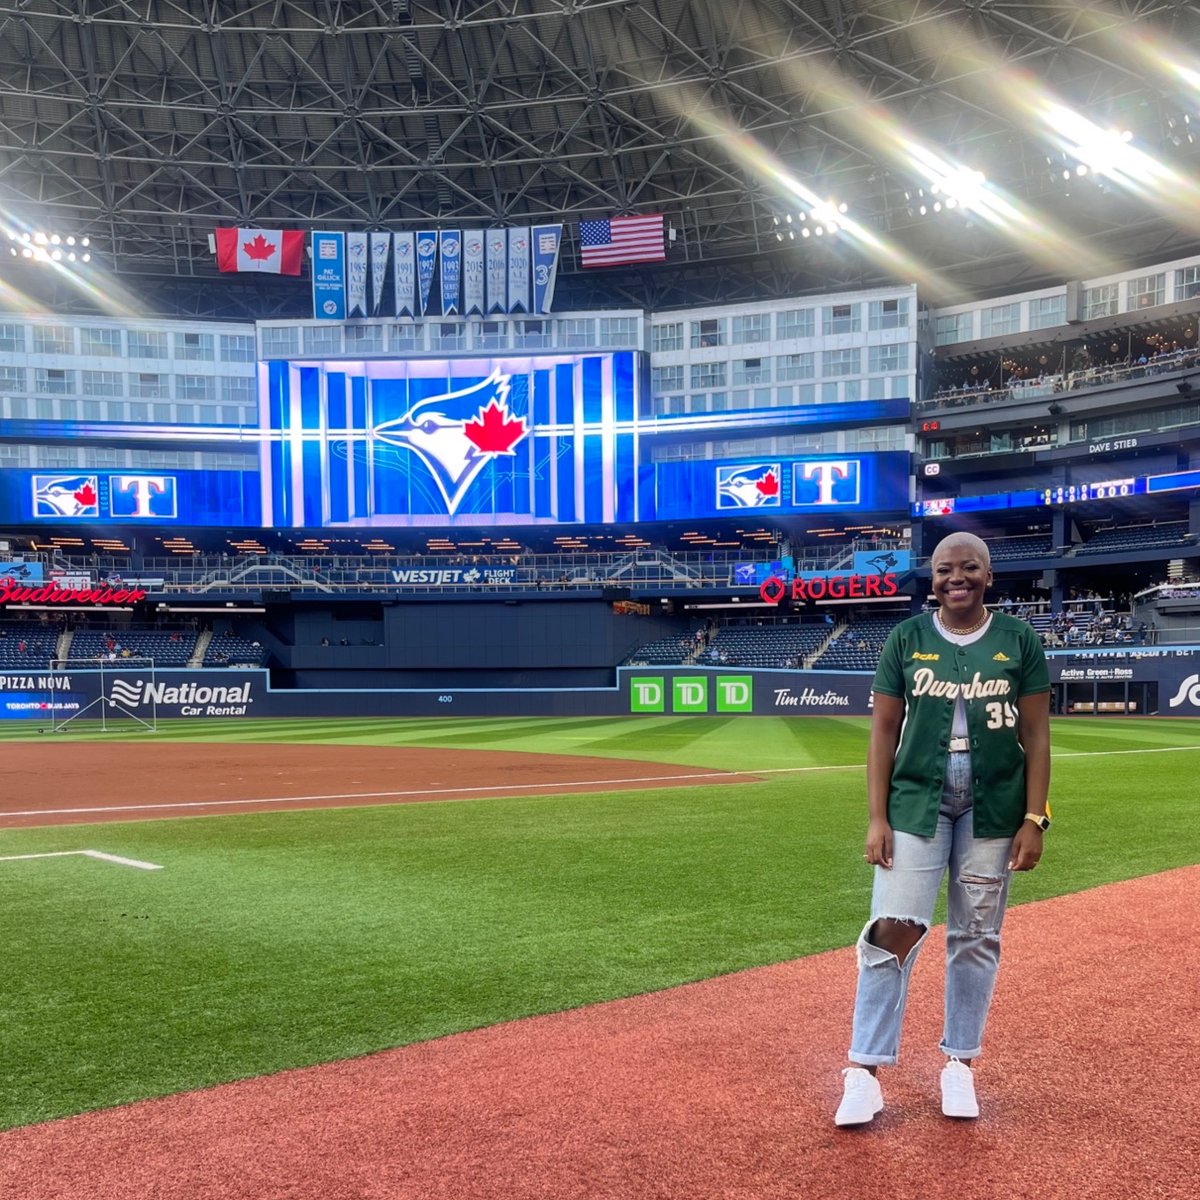 We're so #DCProud of Megan Bent, a DC student, @myDCSA executive chairwoman and @durhamlords rugby player, who threw out the first pitch at the @bluejays game last night!